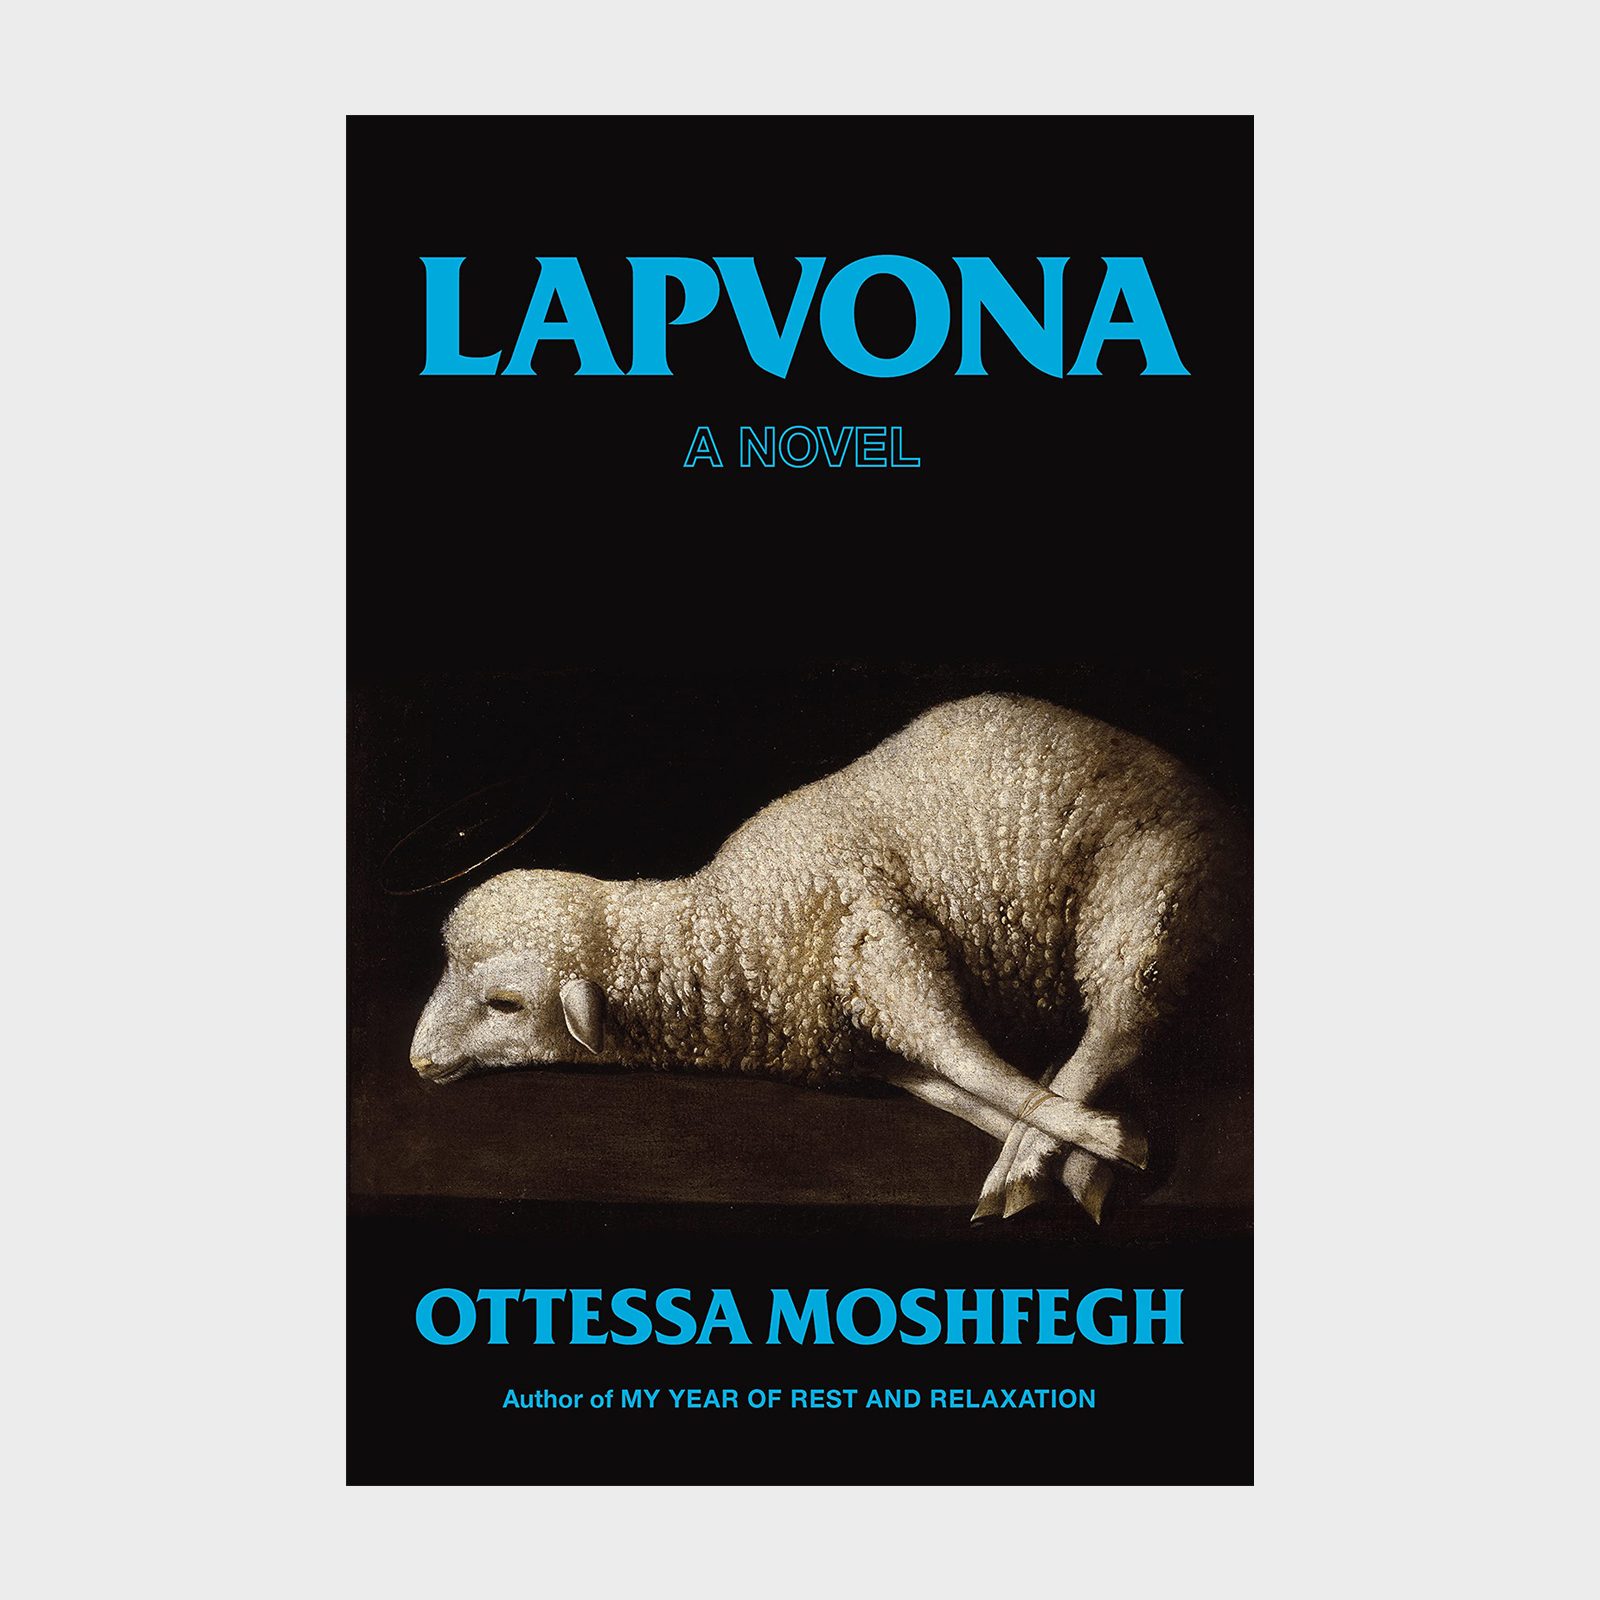 <p class=""><strong>Release date:</strong> June 21, 2022</p> <p>Ottessa Moshfegh's <a href="https://www.amazon.com/Lapvona-Novel-Ottessa-Moshfegh/dp/0593300262/" rel="noopener noreferrer"><em>Lapvona</em></a> has a captivating premise: In a medieval village, an abused motherless boy finds solace in the company of the local midwife, whose mystical gifts scare some of the other neighbors. But when an incident with the town priest and prevailing feudal lord occurs, the boy becomes part of a violent clash of forces—new and old, natural and spiritual, and the very natures of life and death. Find more great fiction on this list of <a href="https://www.rd.com/list/banned-books/" rel="noopener noreferrer">banned books</a> that everyone needs to read.</p> <p class="listicle-page__cta-button-shop"><a class="shop-btn" href="https://www.amazon.com/Lapvona-Novel-Ottessa-Moshfegh/dp/0593300262/">Shop Now</a></p>